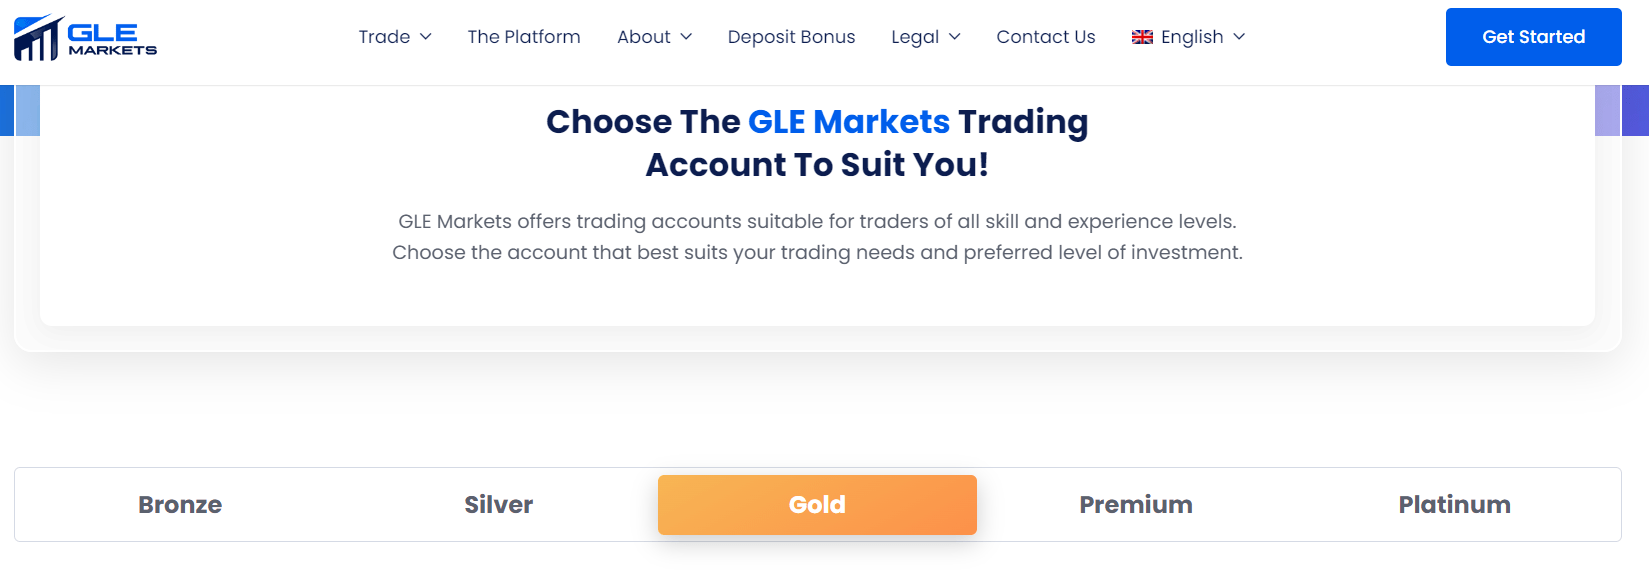 Choose the GLE Markets trading account to suit you 